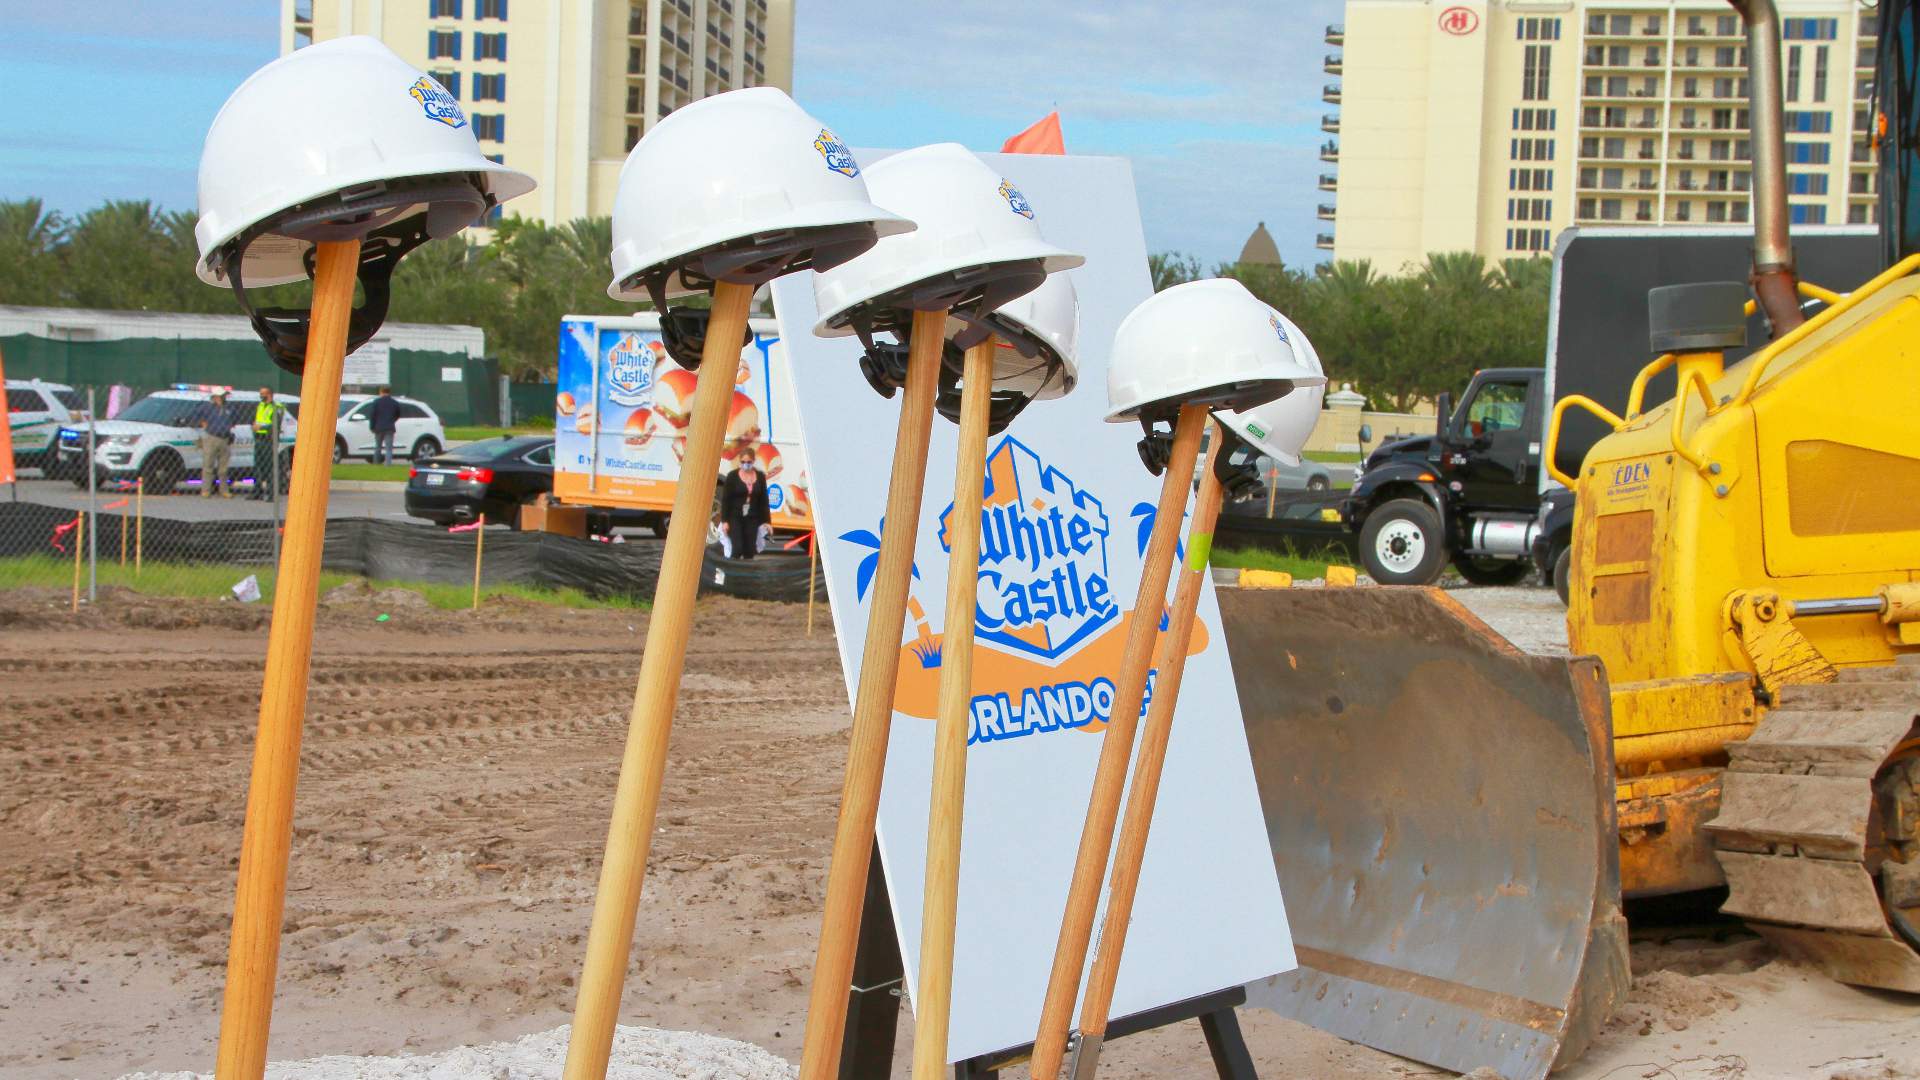 White Castle looks to fill 120 jobs as construction on Orlando location moves forward